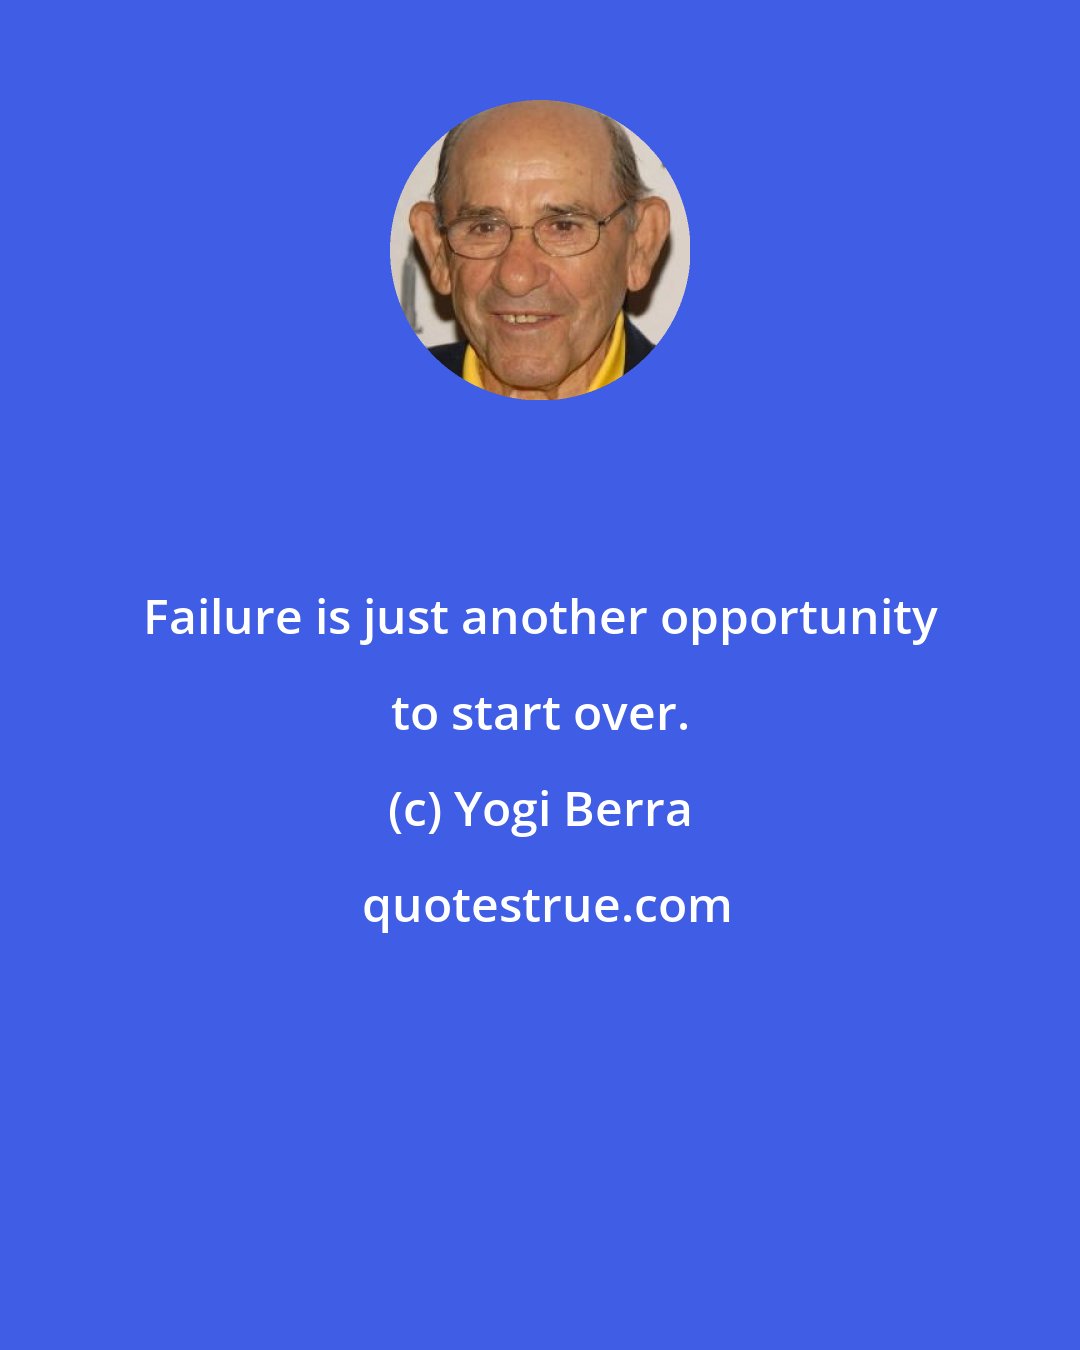 Yogi Berra: Failure is just another opportunity to start over.